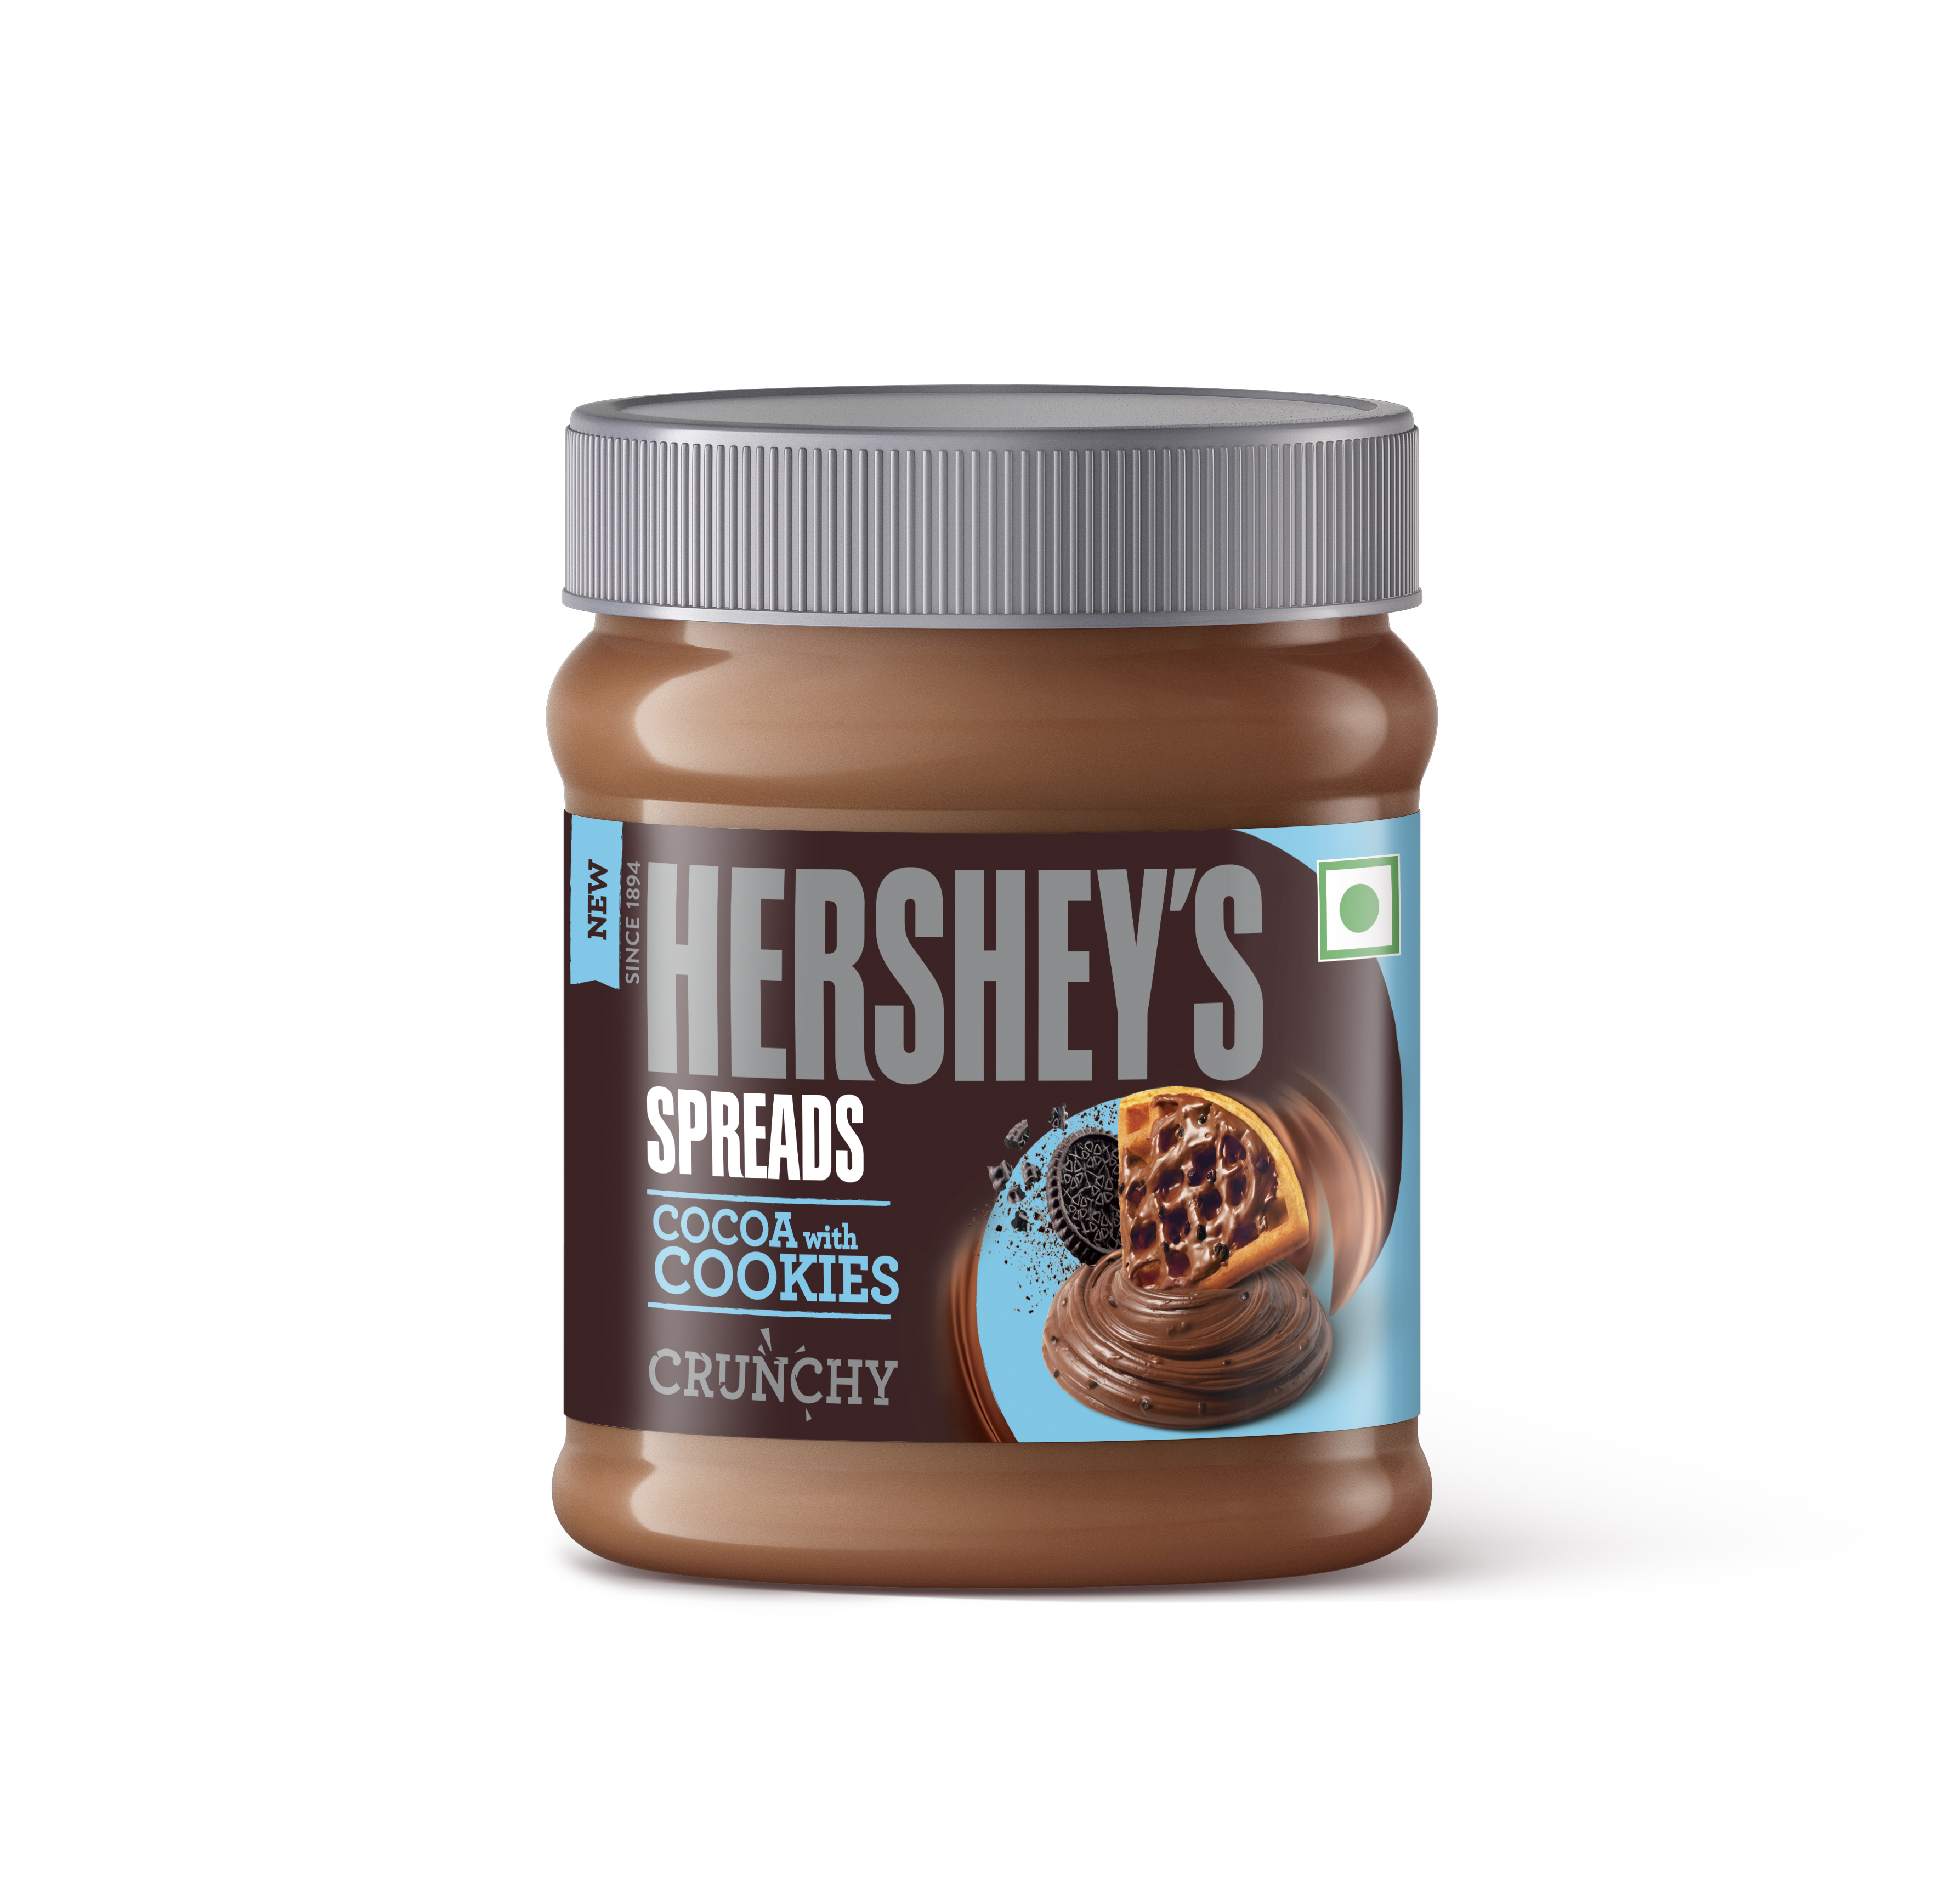 Hershey India strengthens its presence in Chocolate spreads category, with a unique multi-sensorial variant ‘Crunchy Cookie’ Chocolate spread